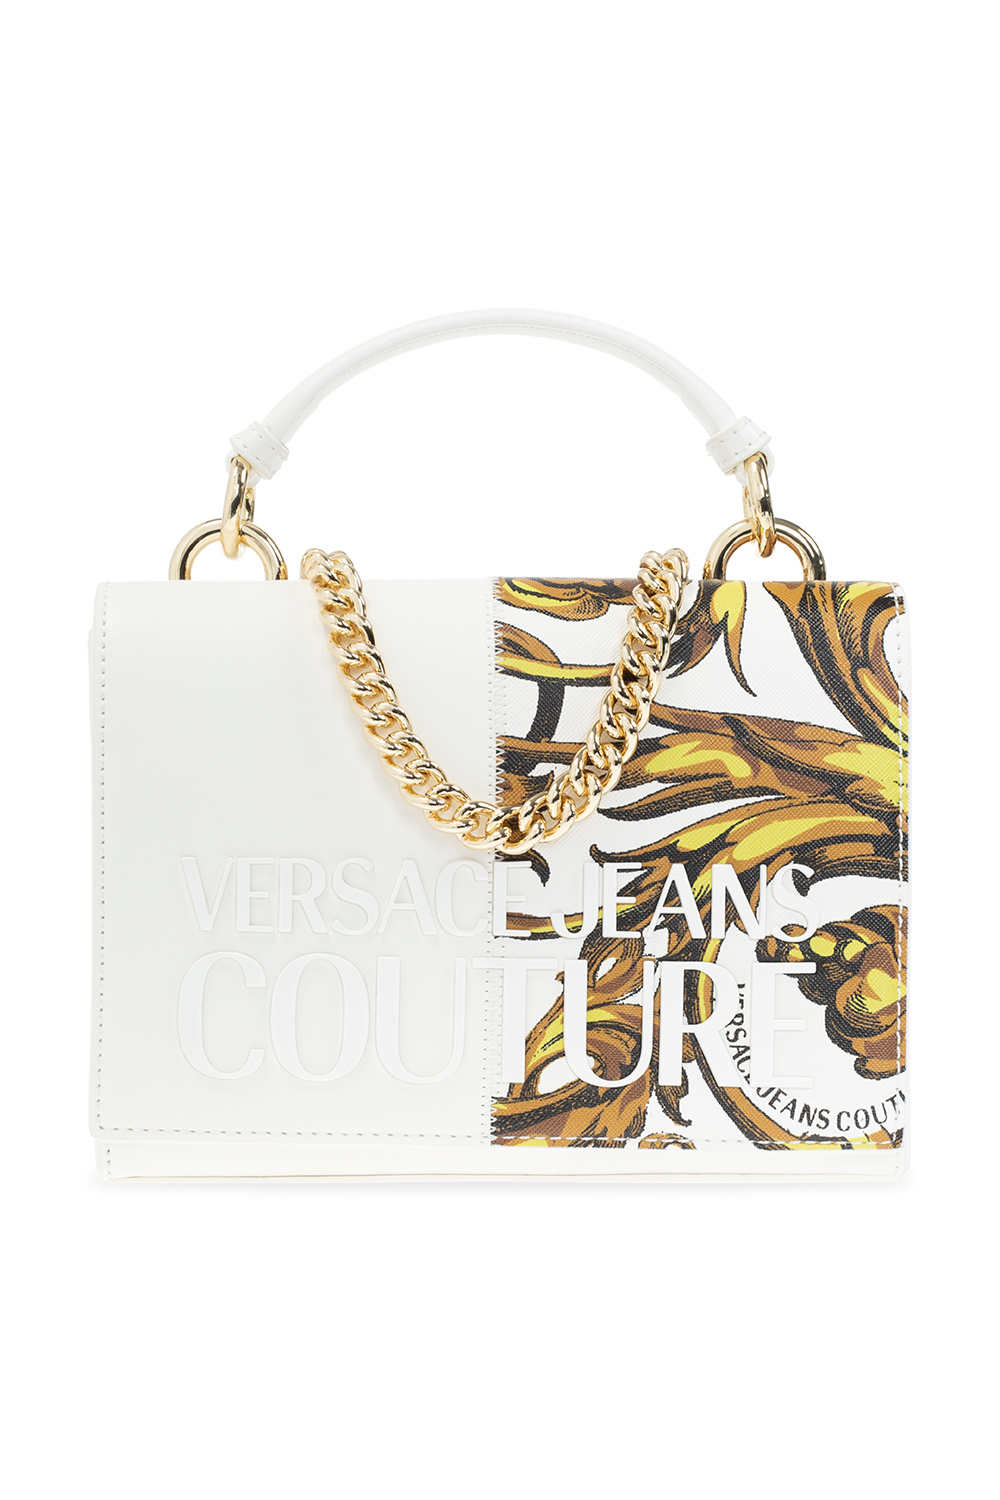 Versace Jeans Women's Chain Couture Tote Bag - Metallic - Totes